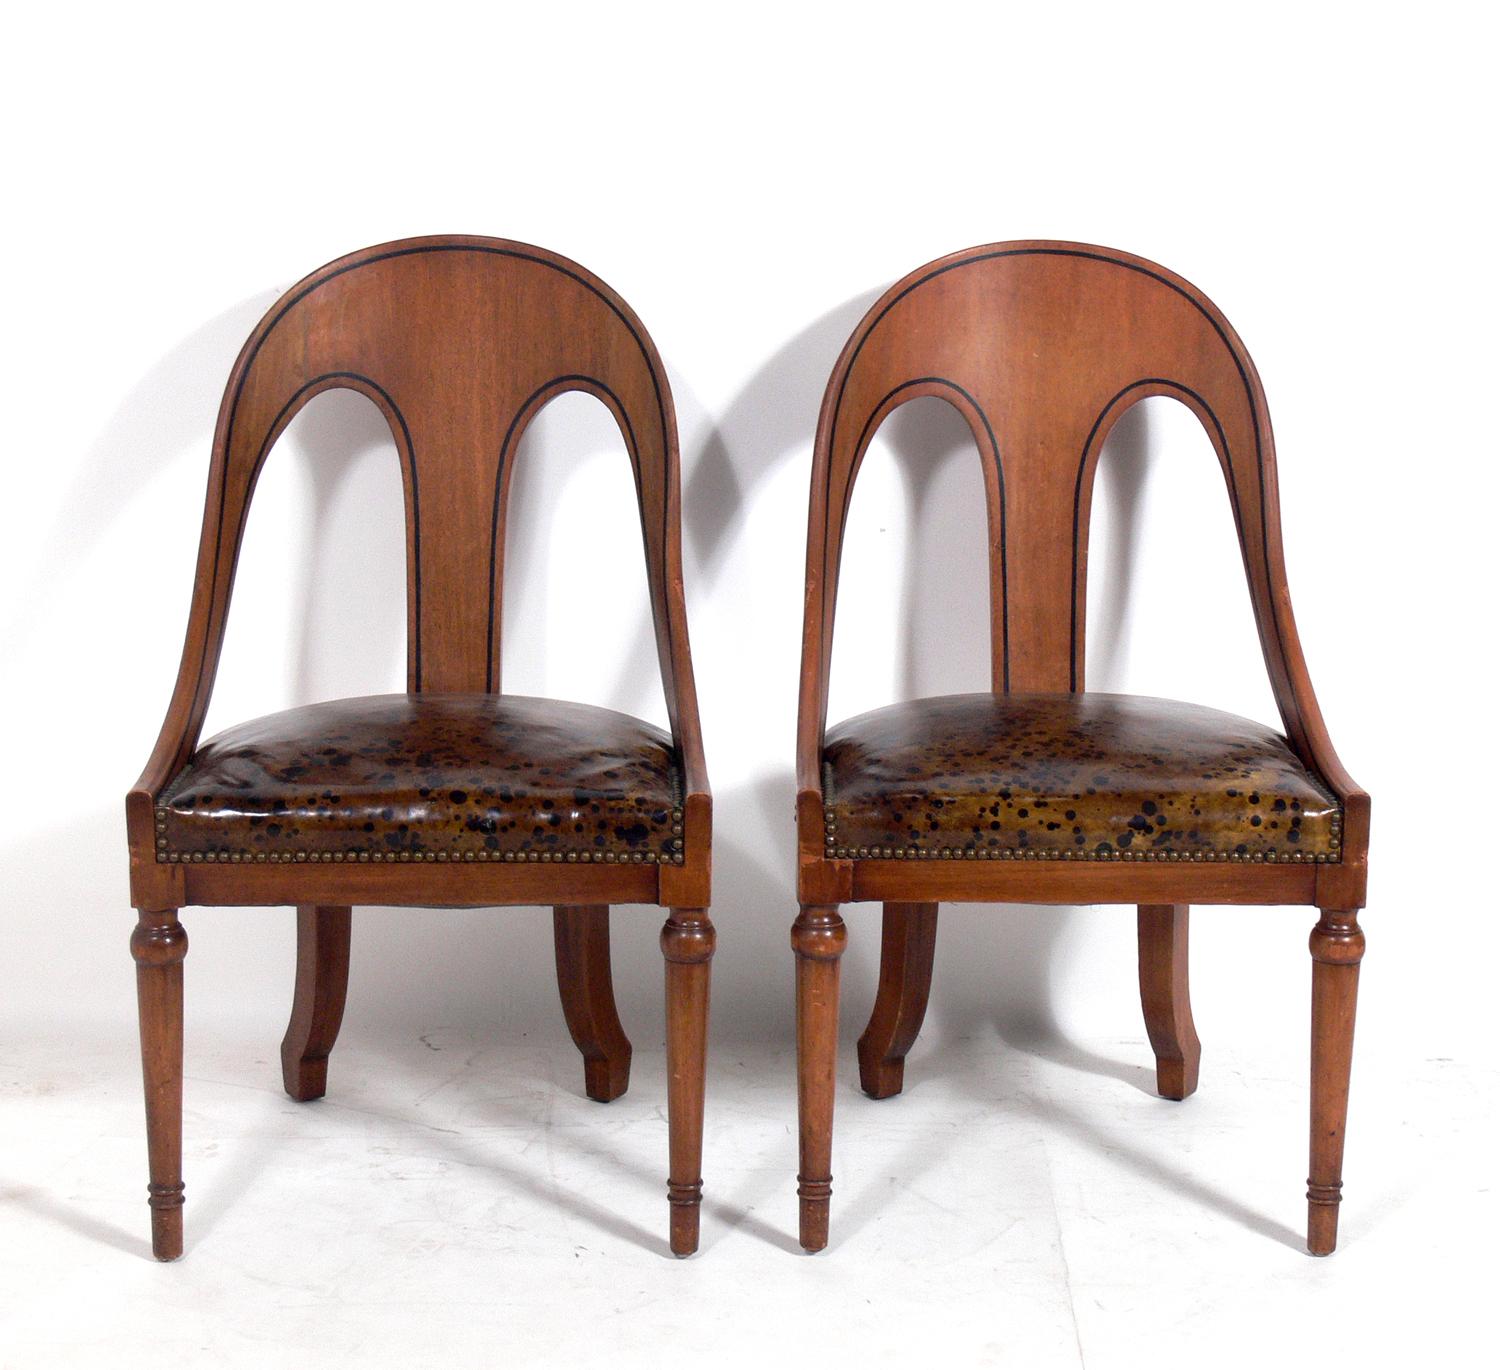 Pair of spoonback chairs with oil spot leather seats, American, circa 1960s.